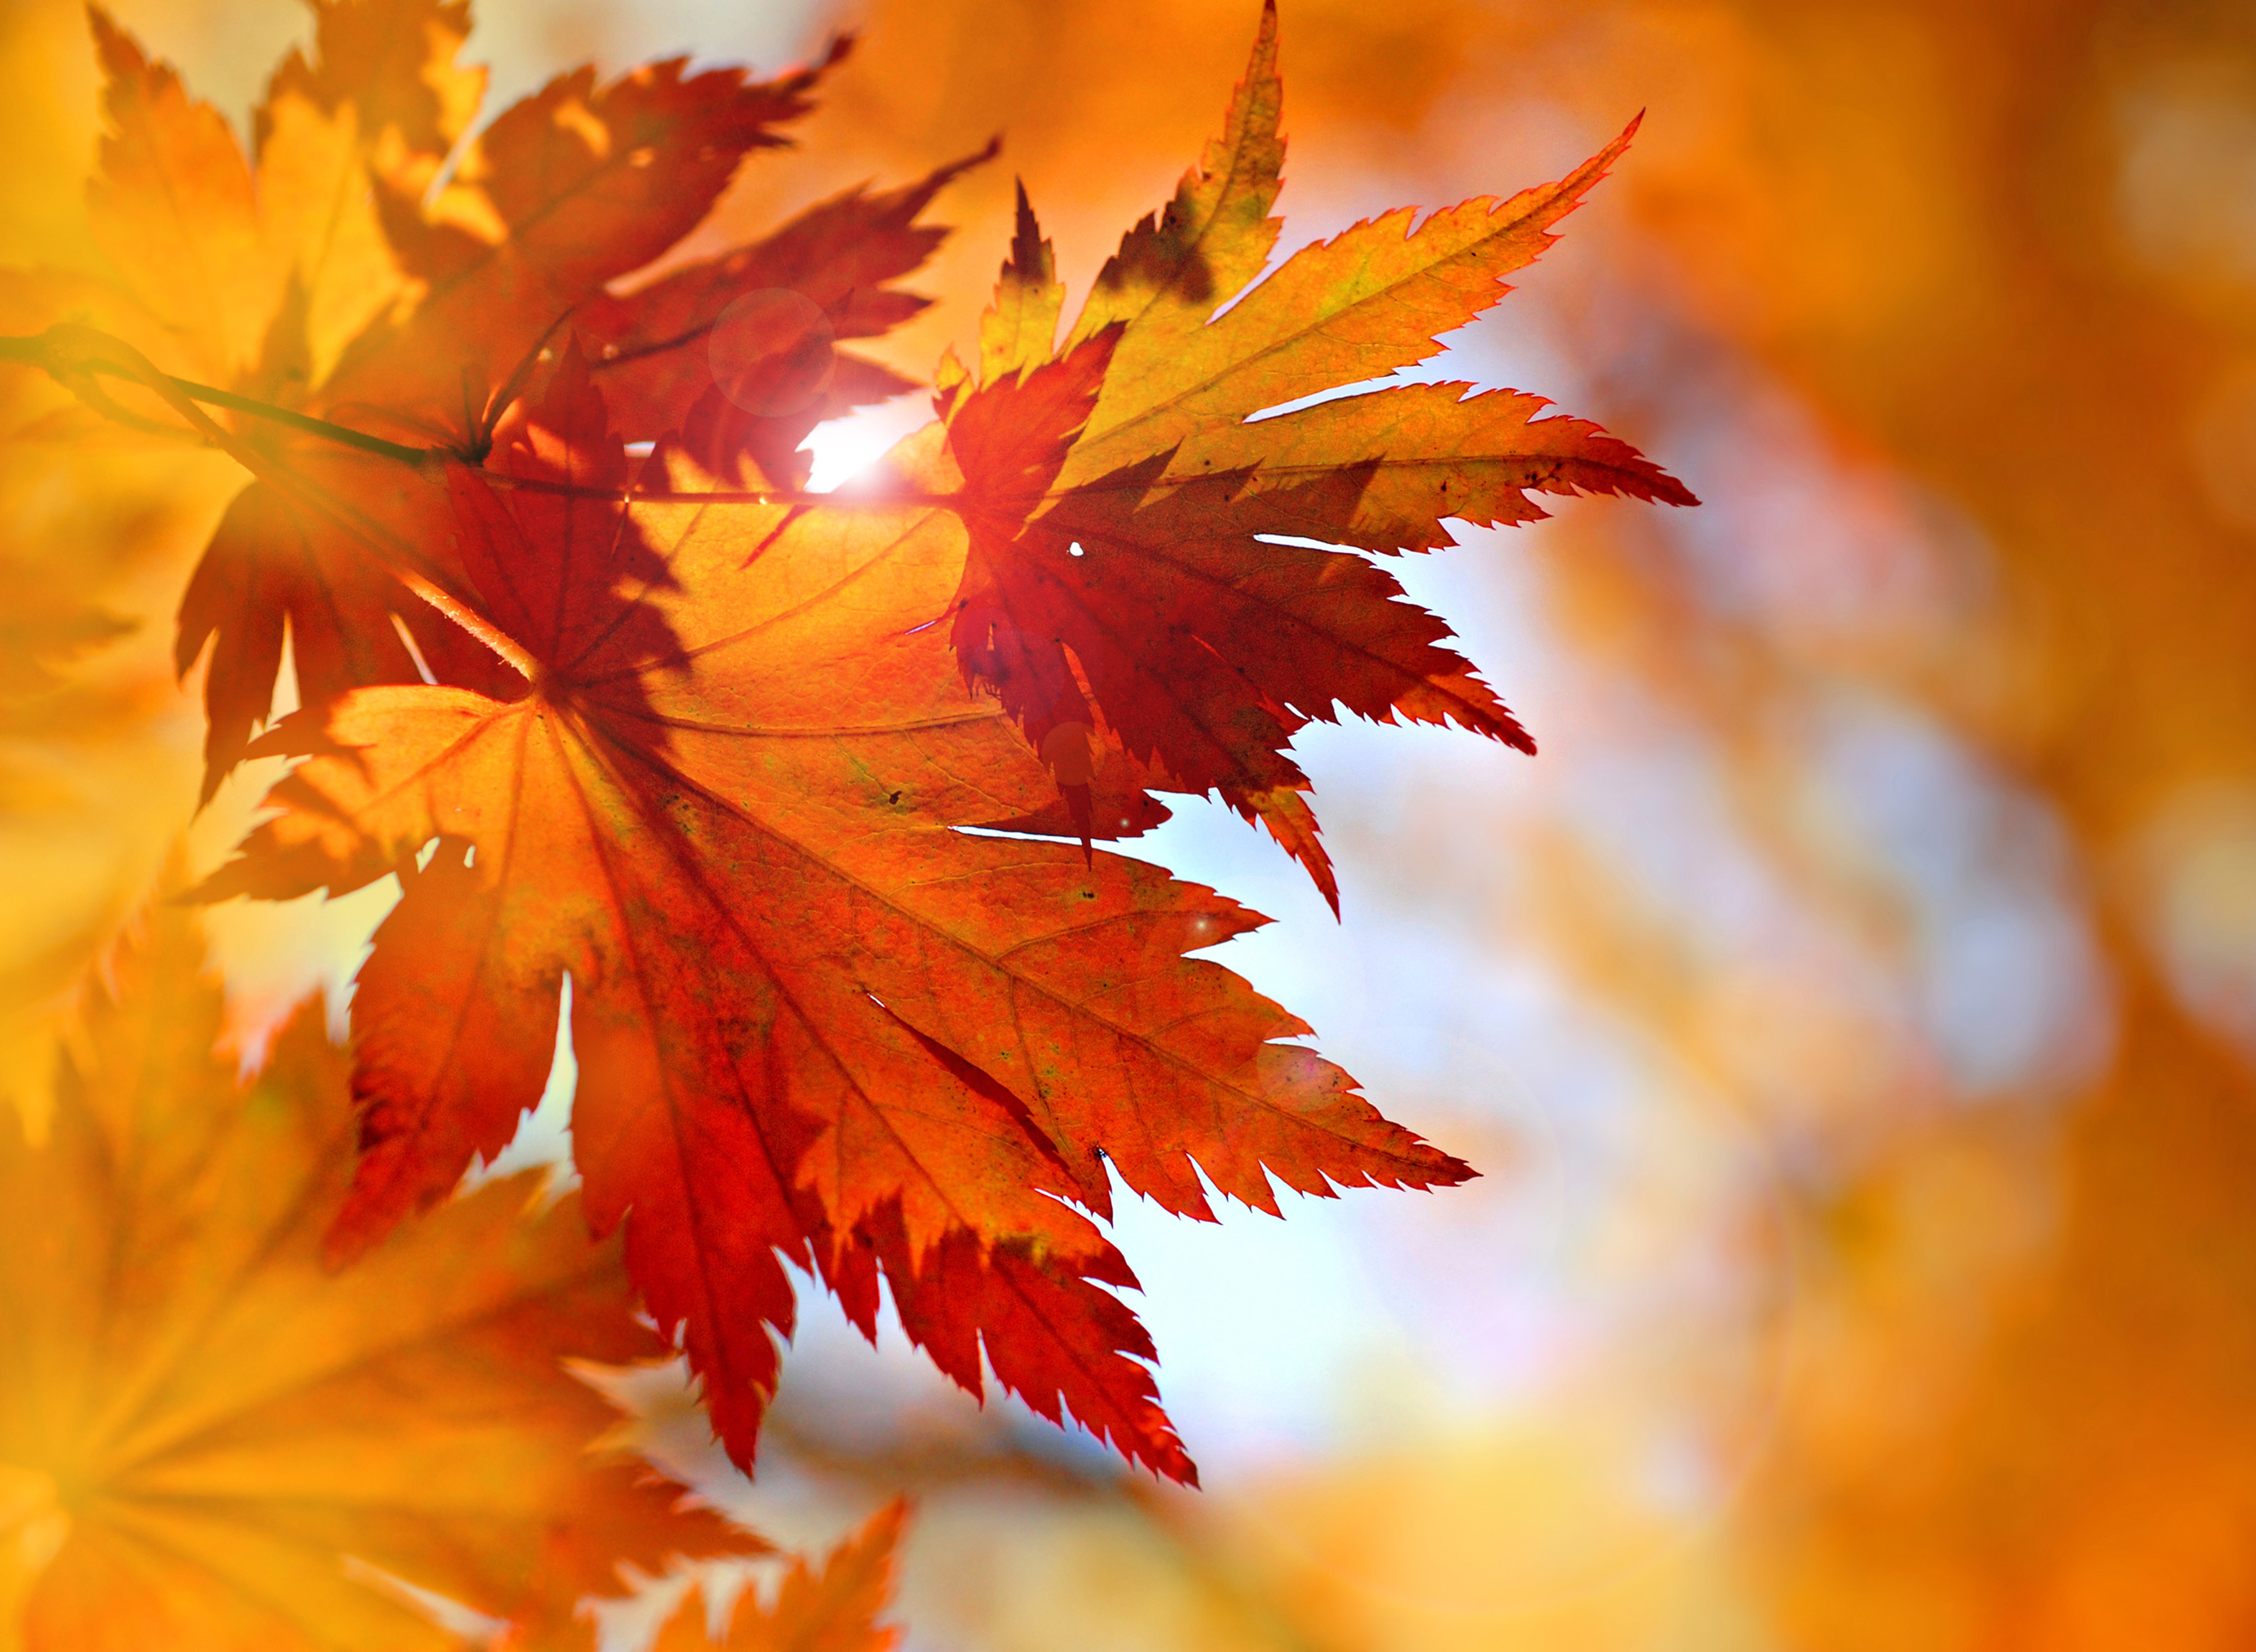 New Lock Screen Wallpapers earth, leaf, close up, fall, maple leaf